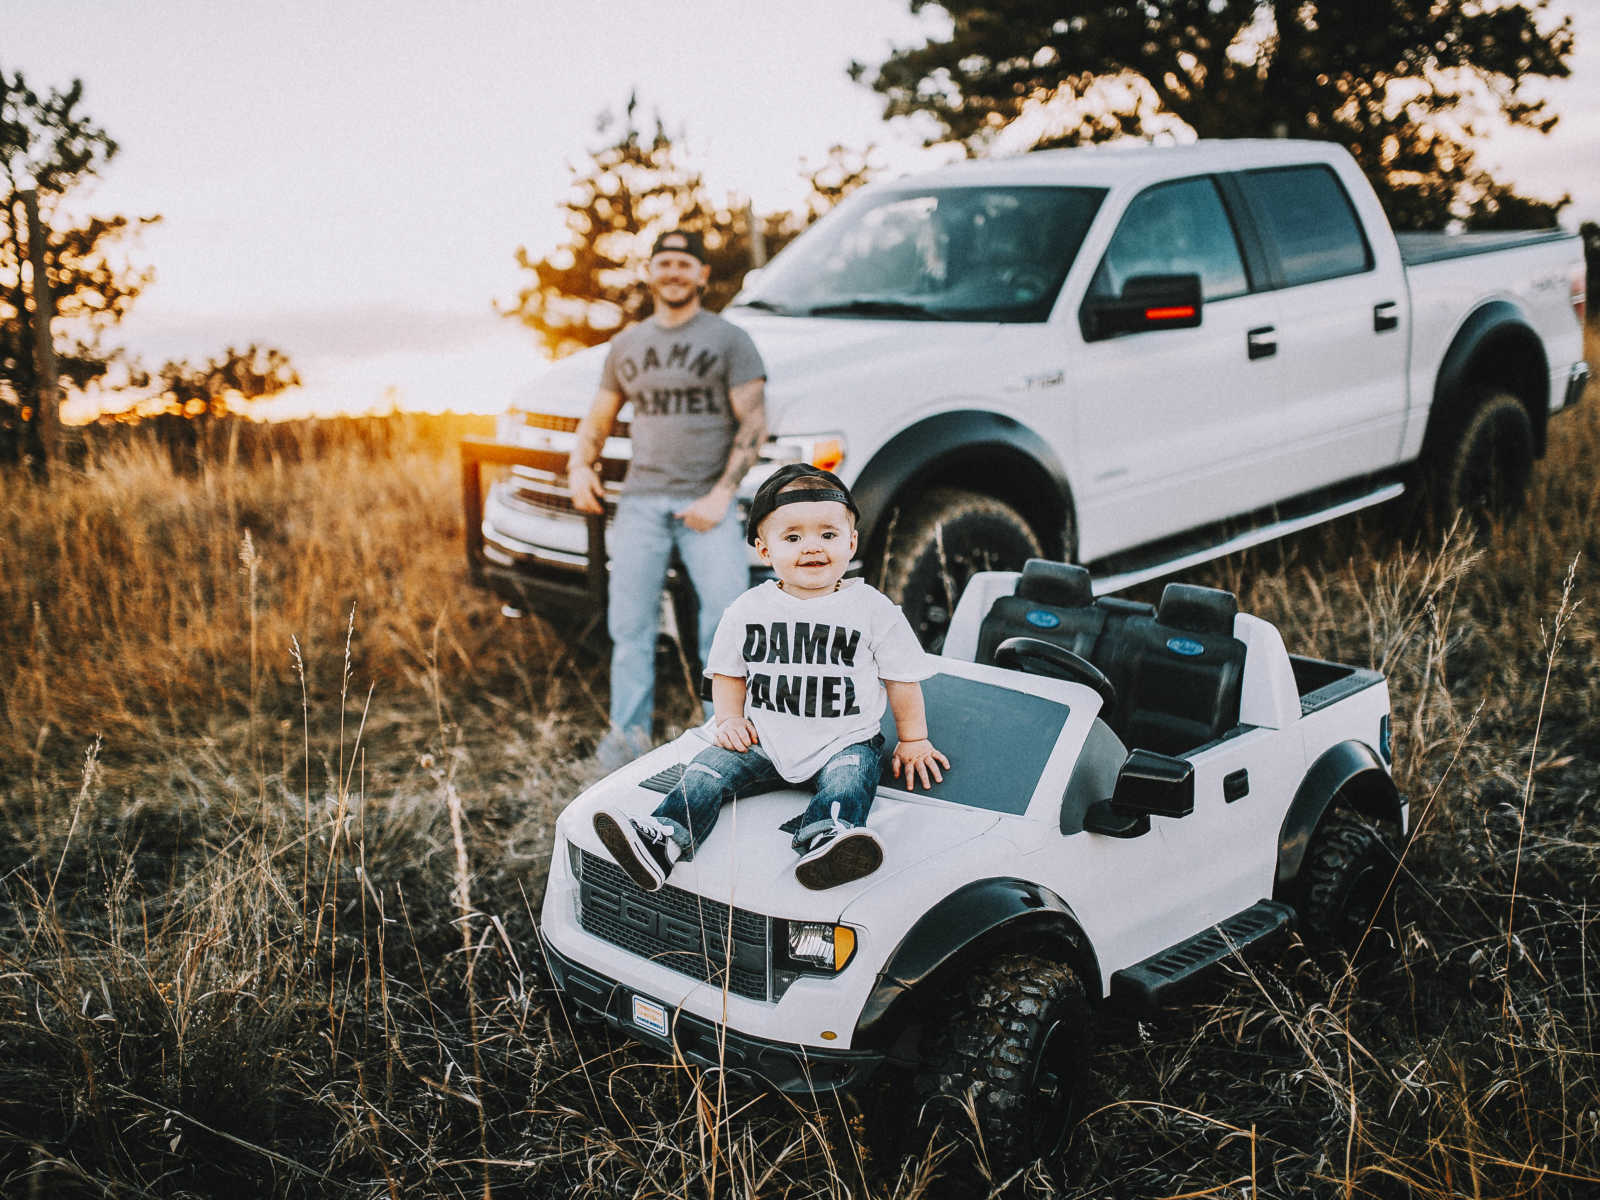 Toddler sits on hood of toy truck with dad wearing the same outfit in background leaning on his truck